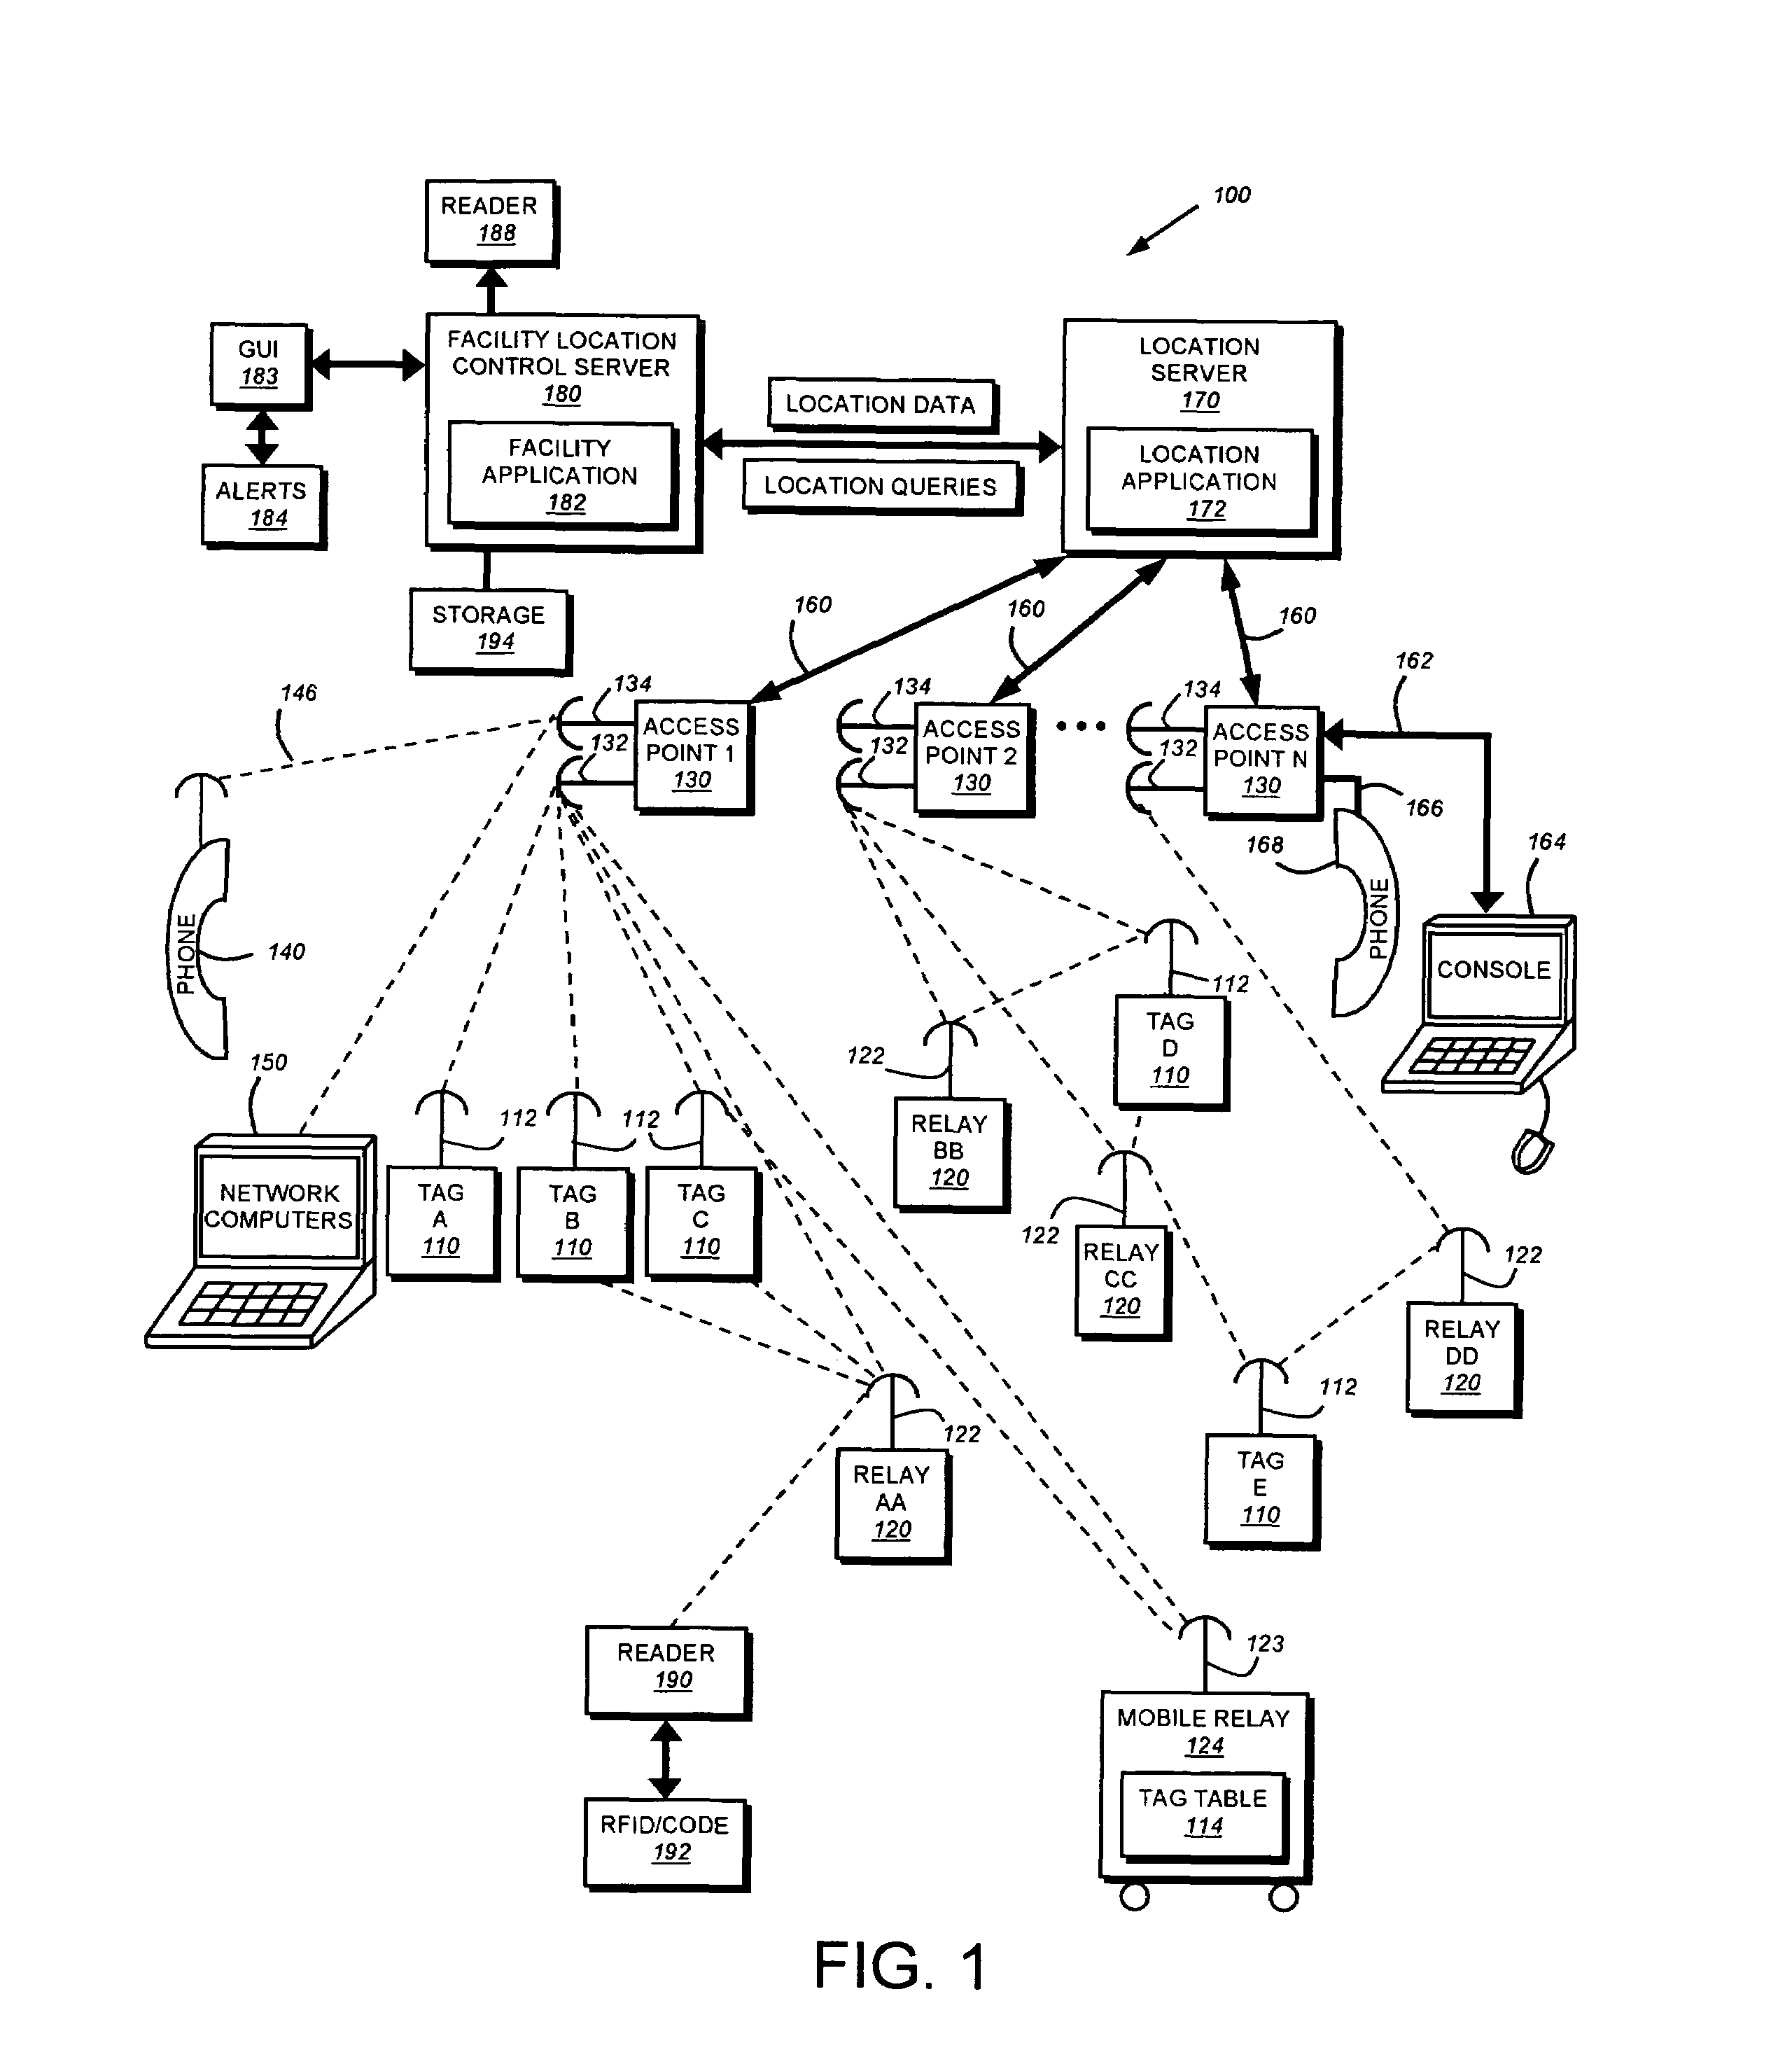 System and method for locating and communicating with personnel and equipment in a facility